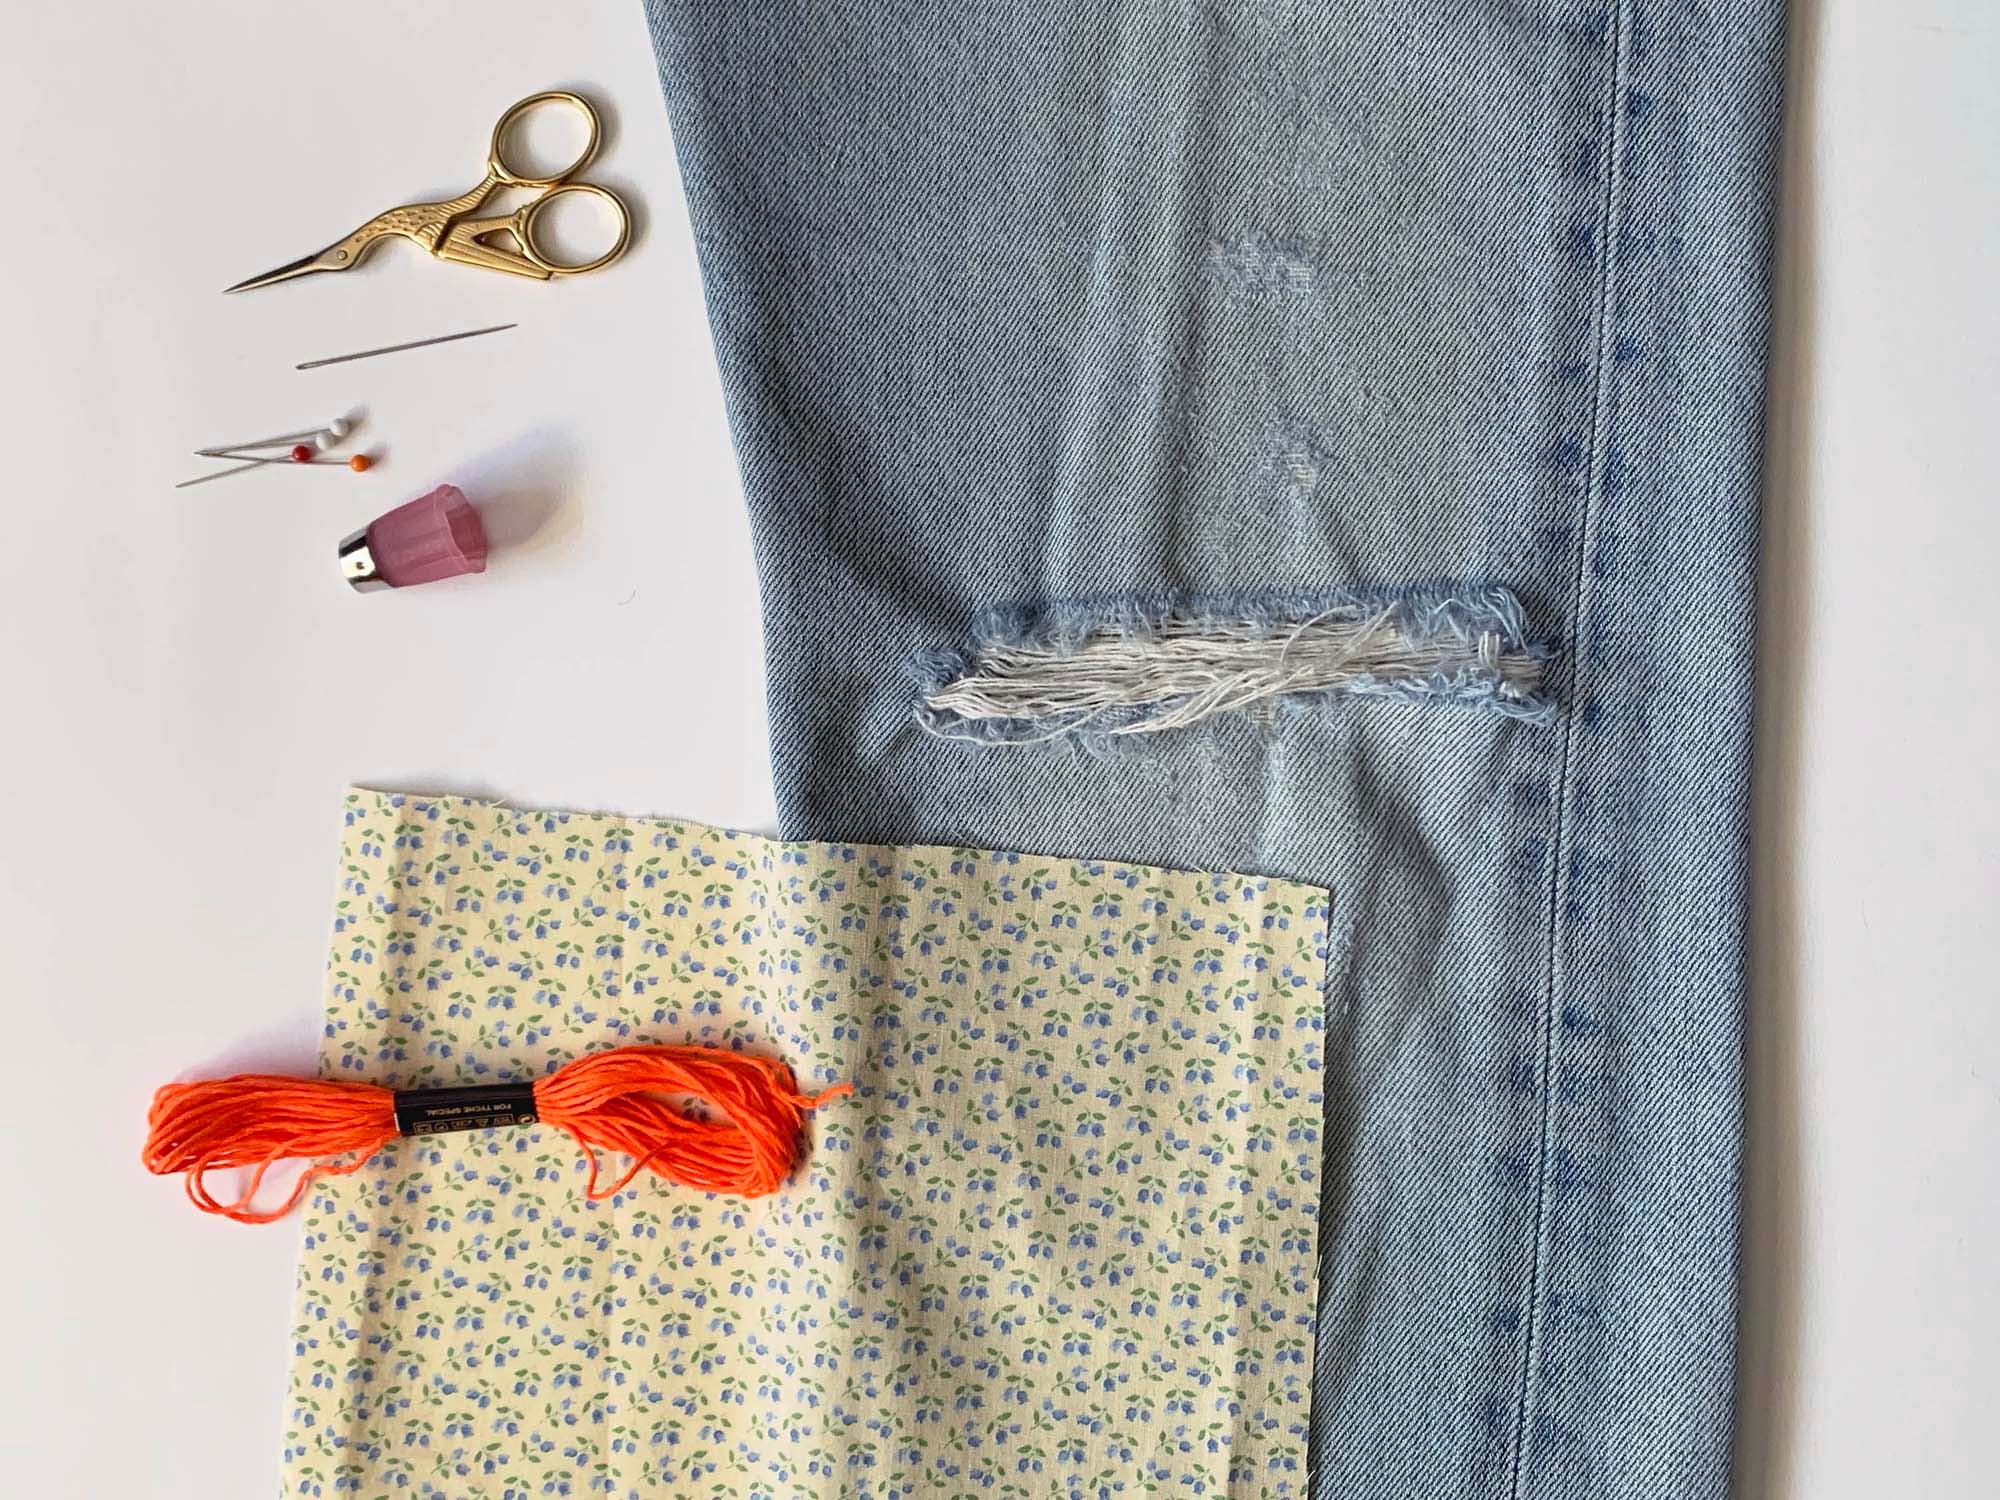 Sewing On My Kitchen Table: DIY Patches for Jeans - Tutorial